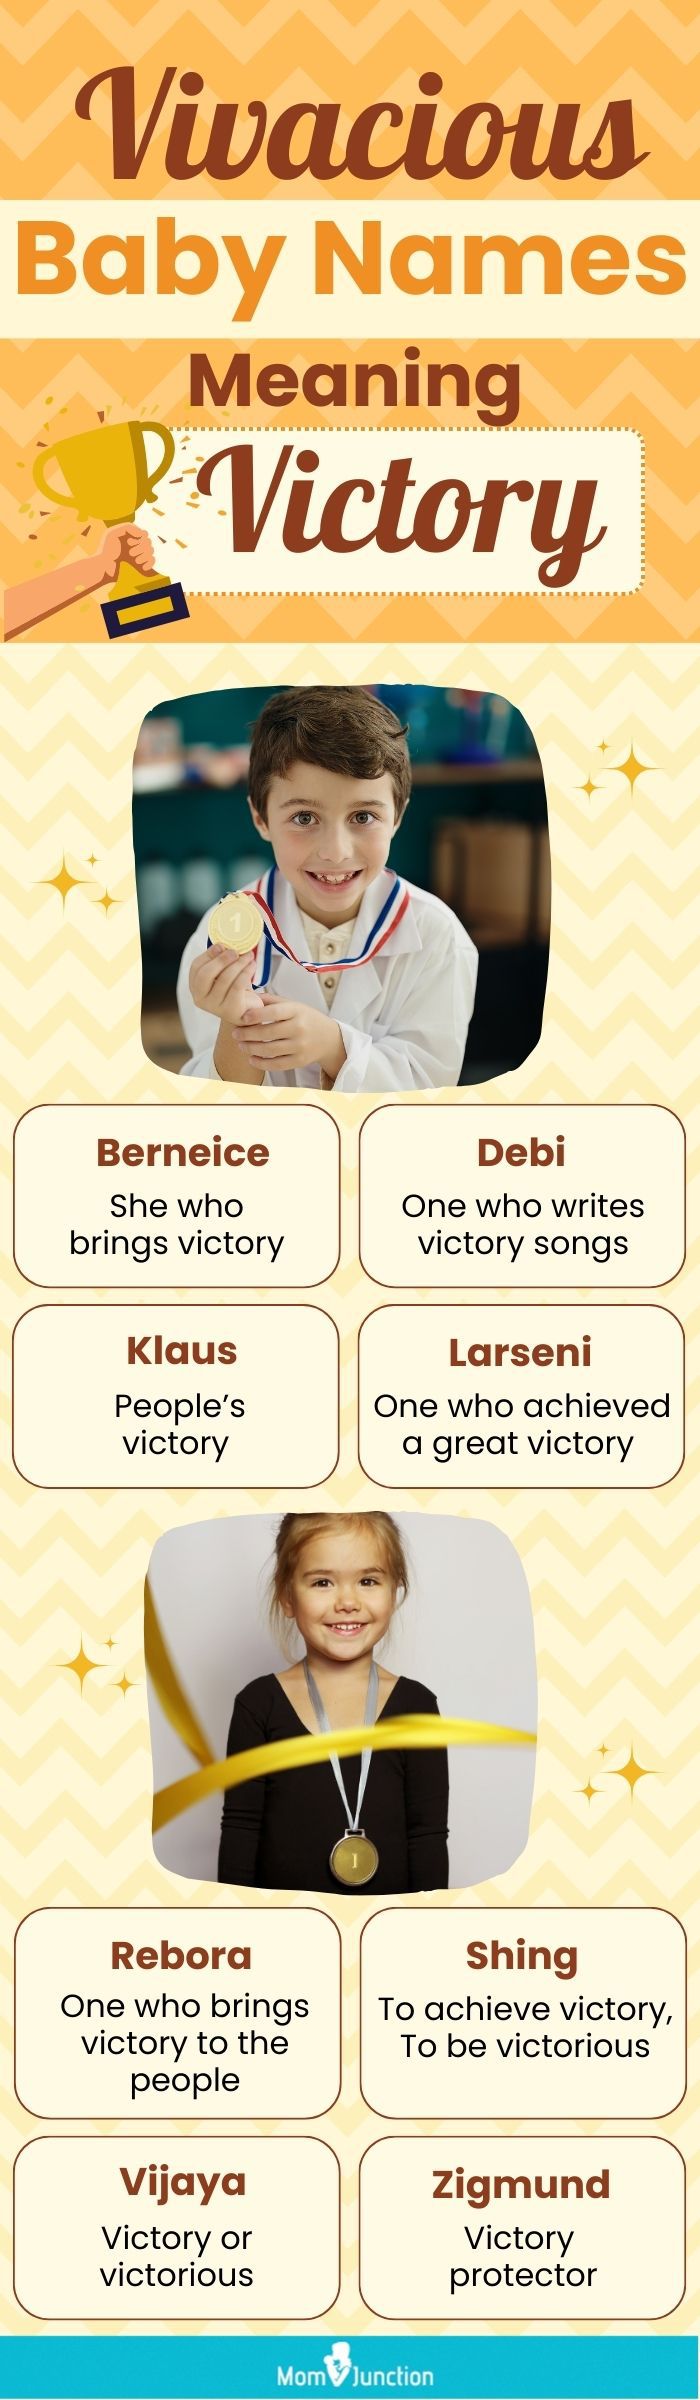 vivacious baby names meaning victory (infographic)